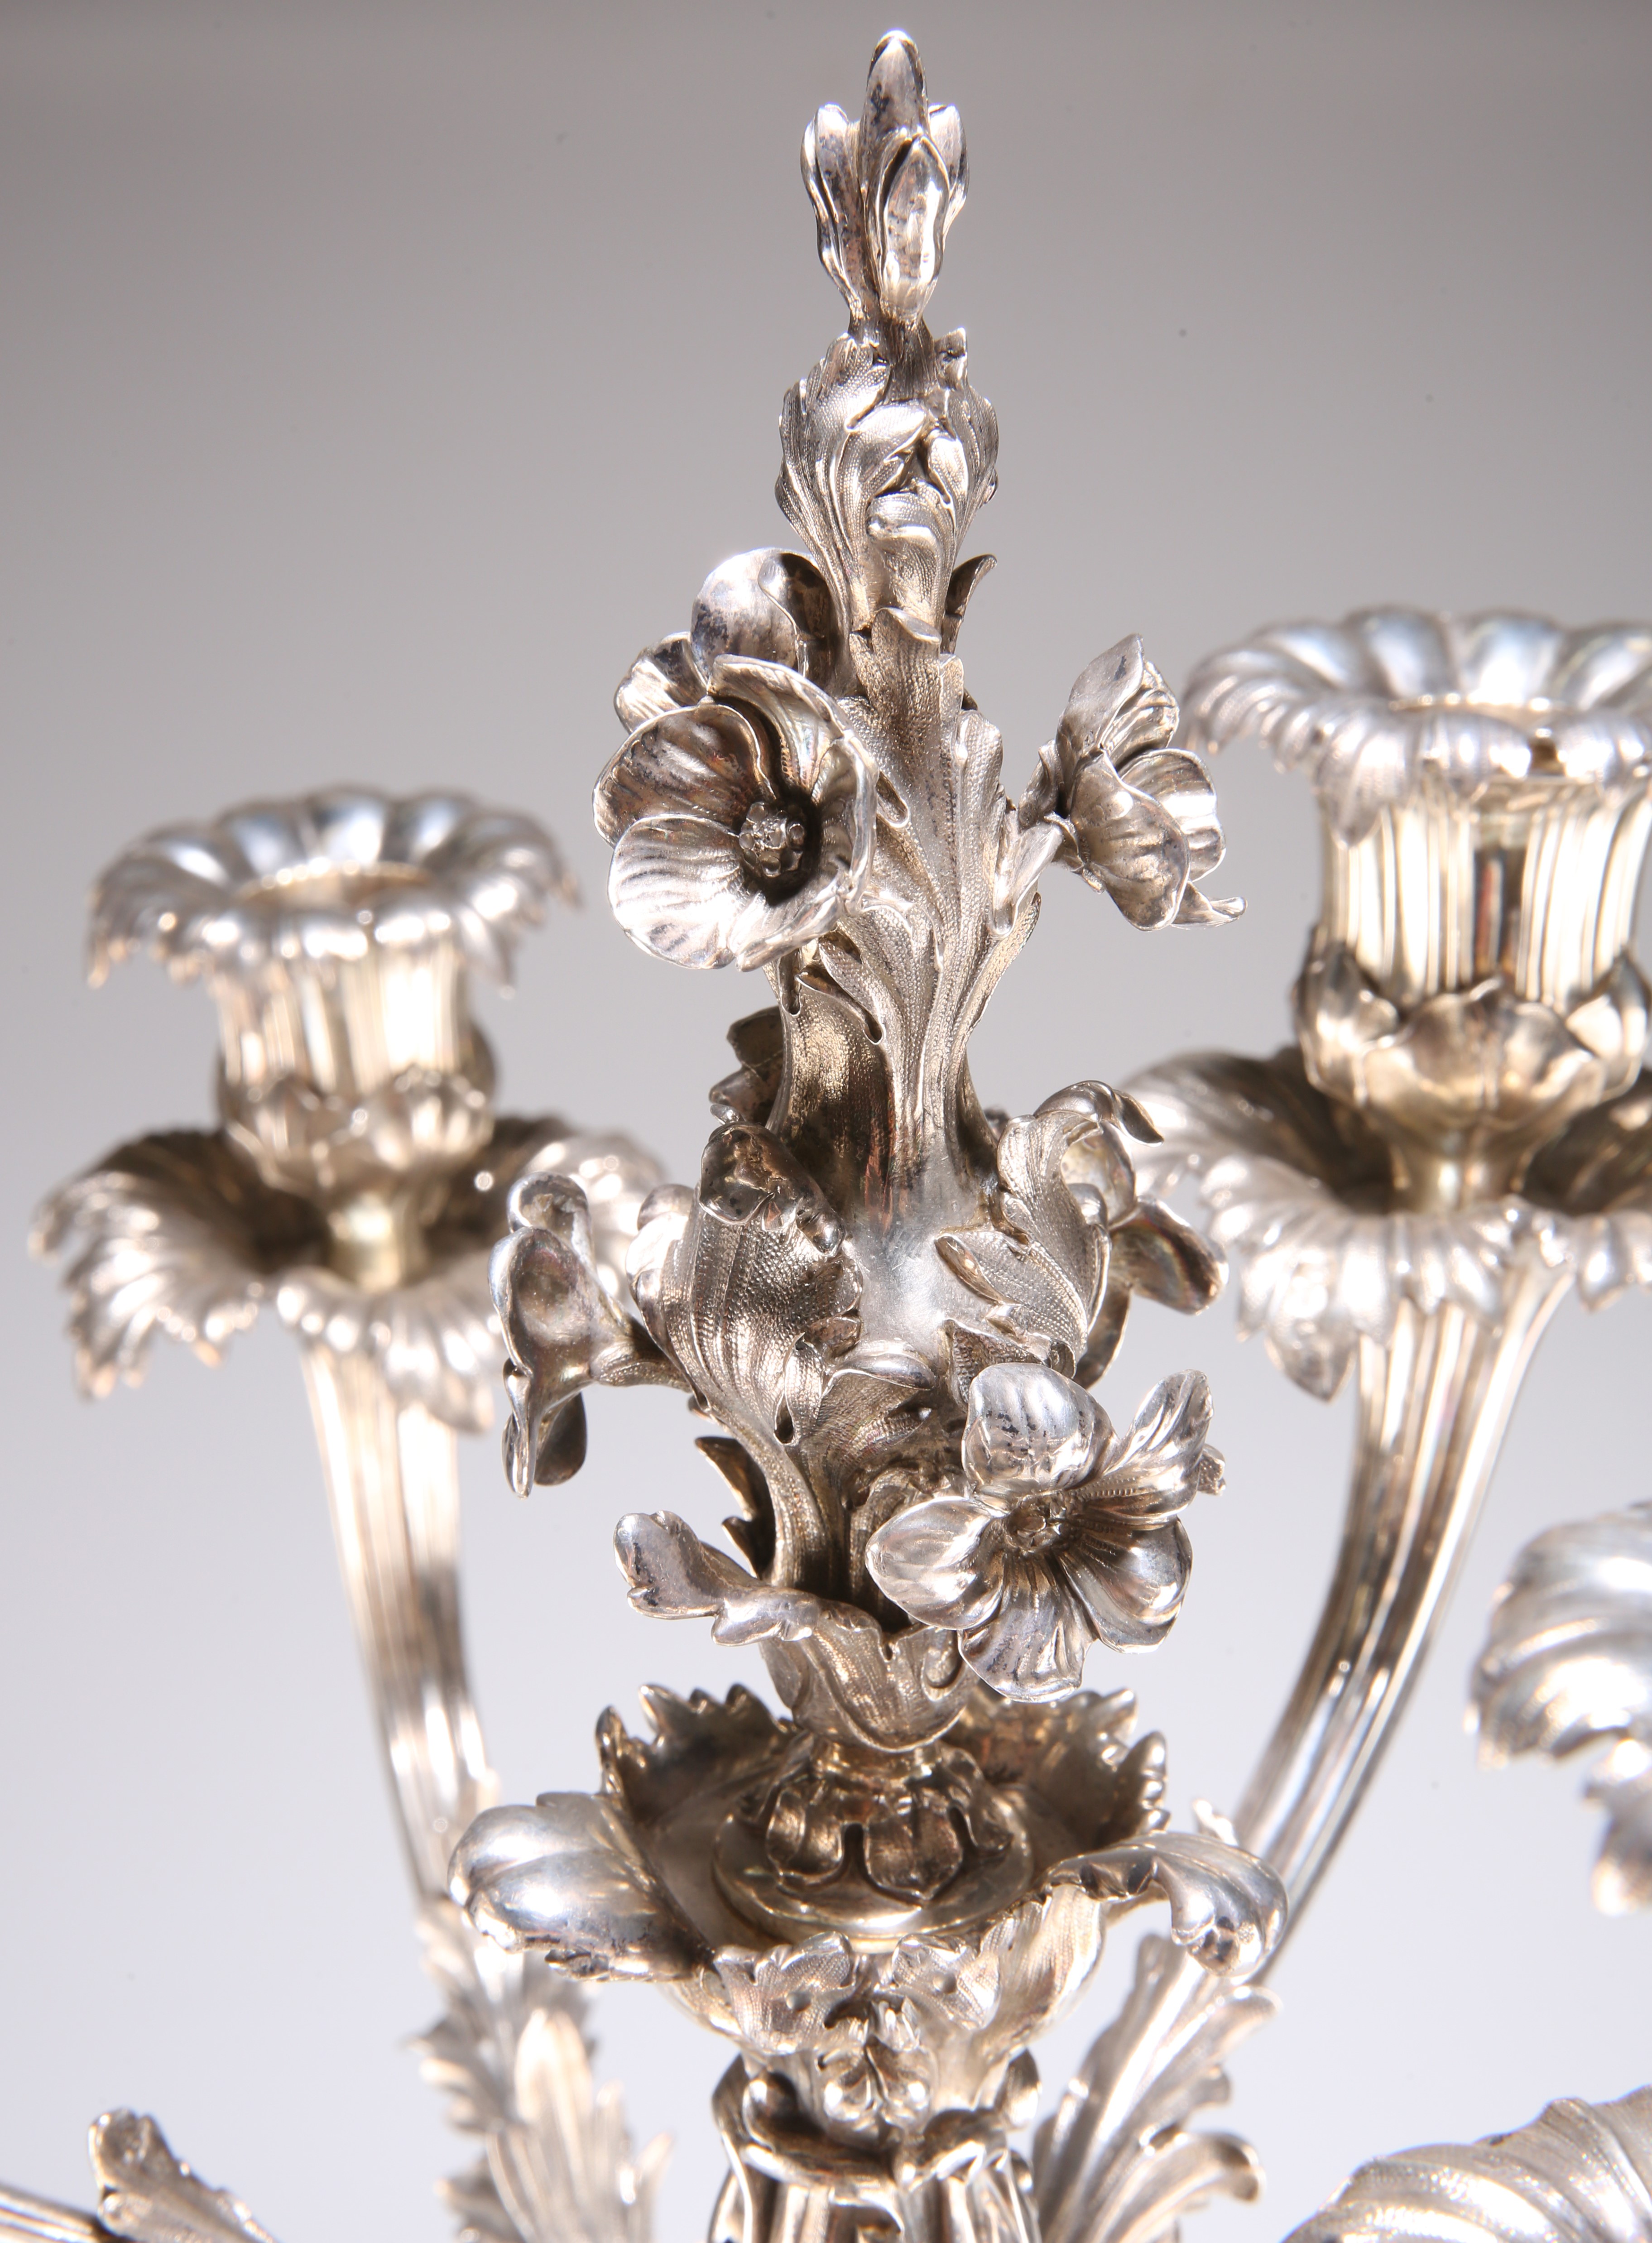 A VICTORIAN SILVER SIX-LIGHT CANDELABRUM CENTREPIECE - Image 5 of 8